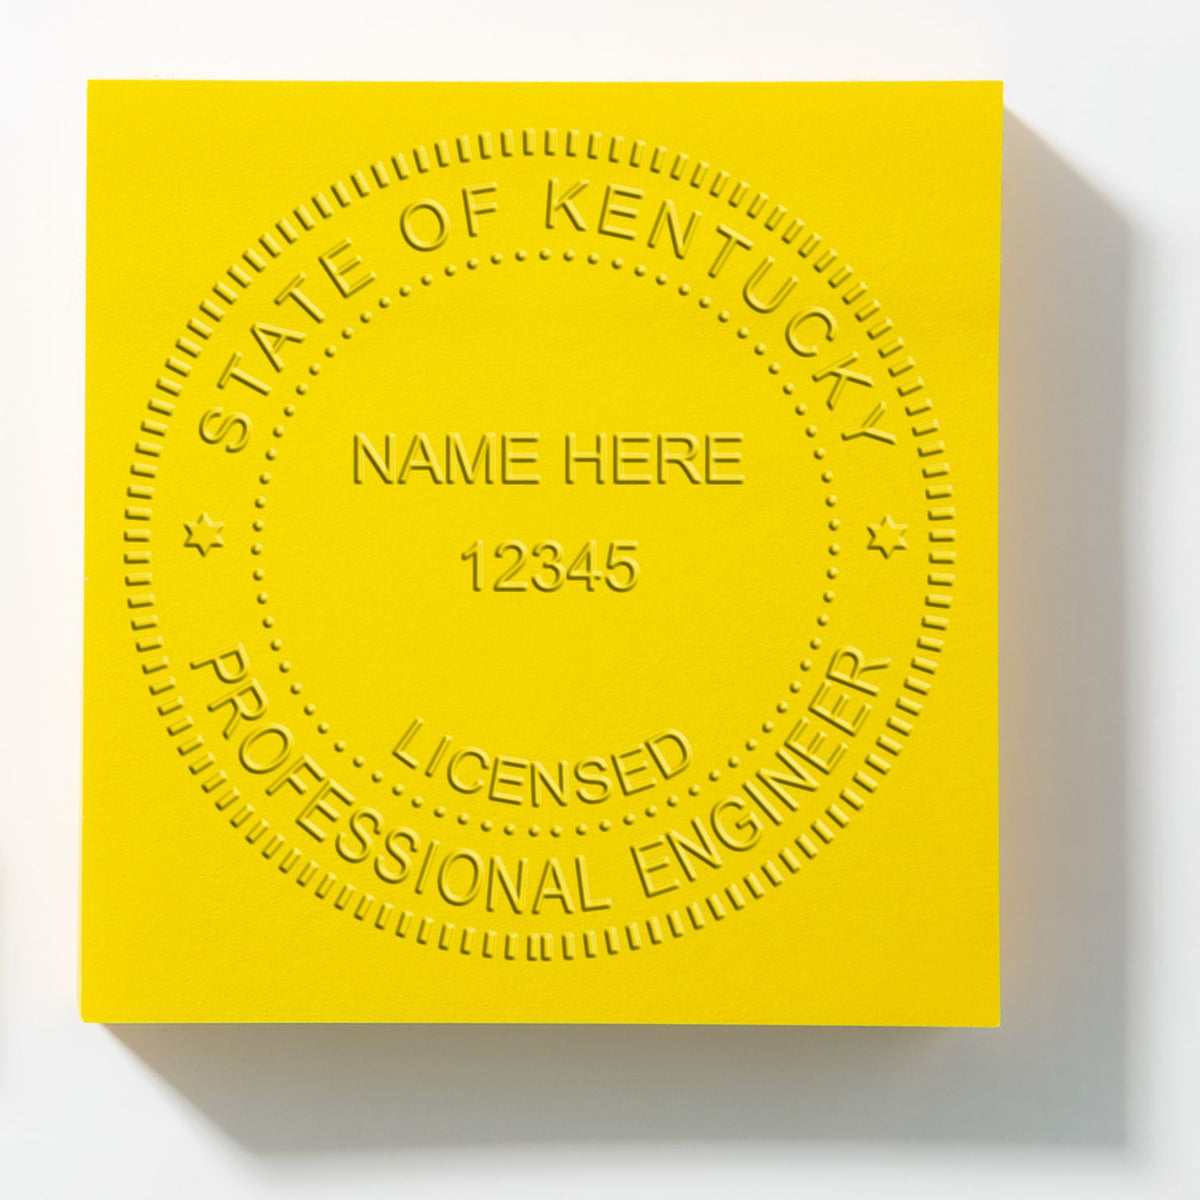 An in use photo of the Gift Kentucky Engineer Seal showing a sample imprint on a cardstock